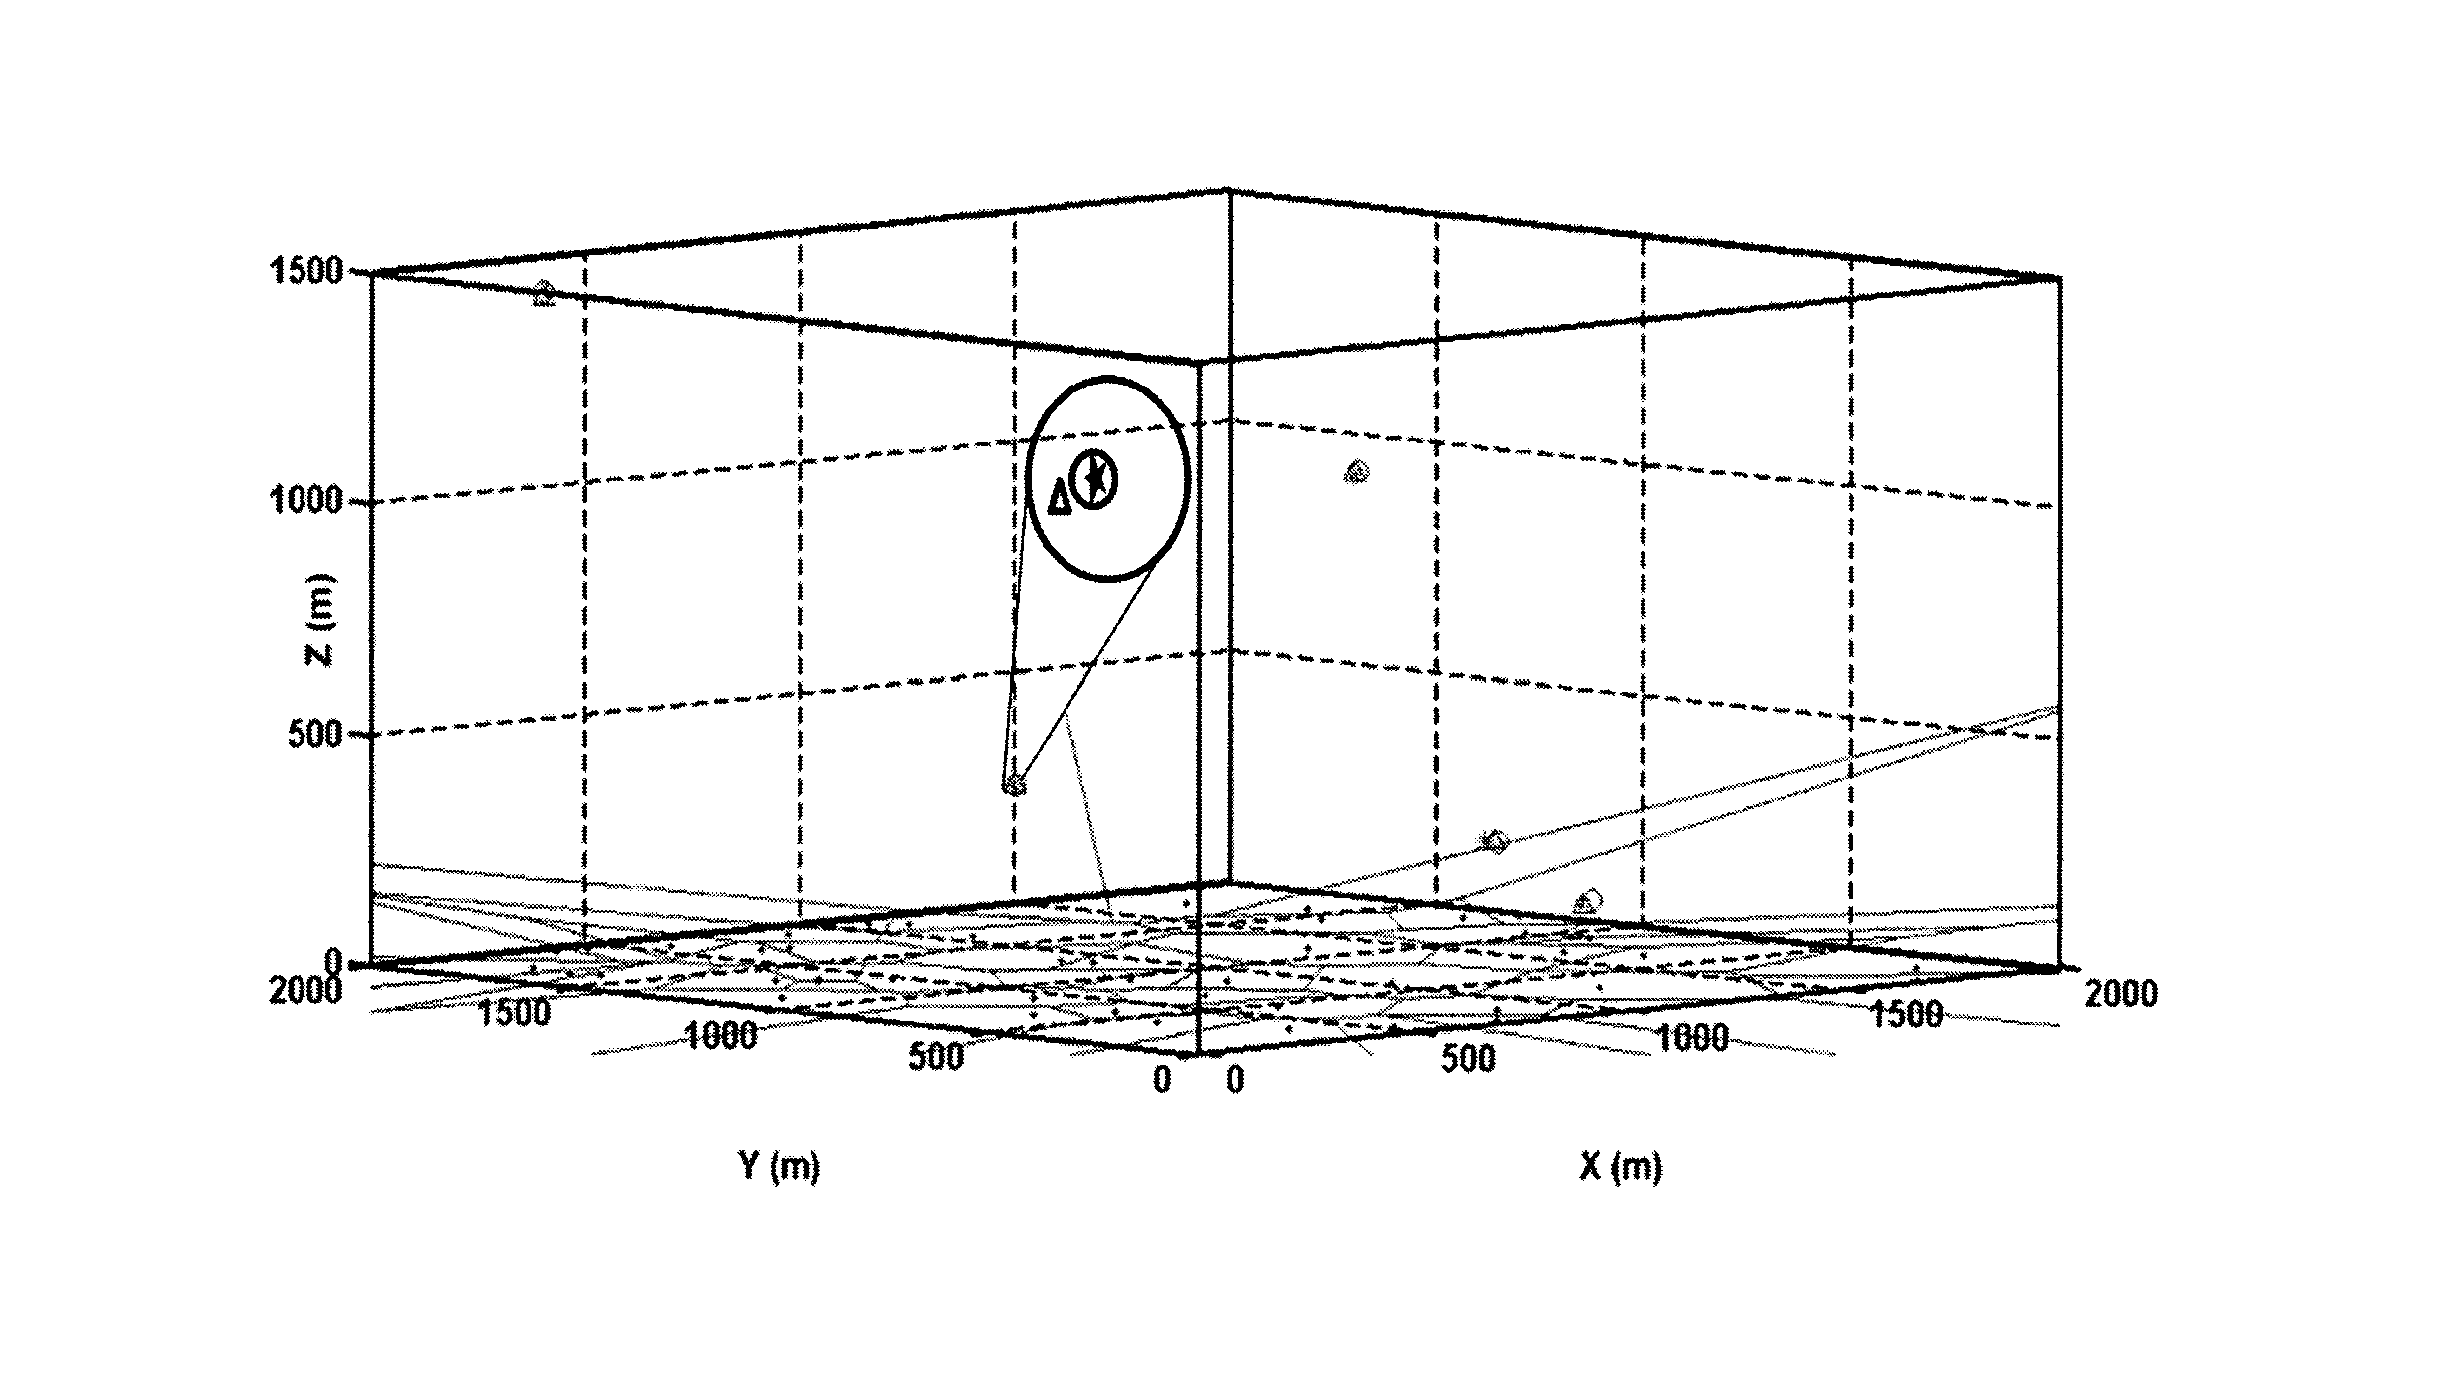 System and Methods for Non-Parametric Technique Based Geolocation and Cognitive Sensor Activation